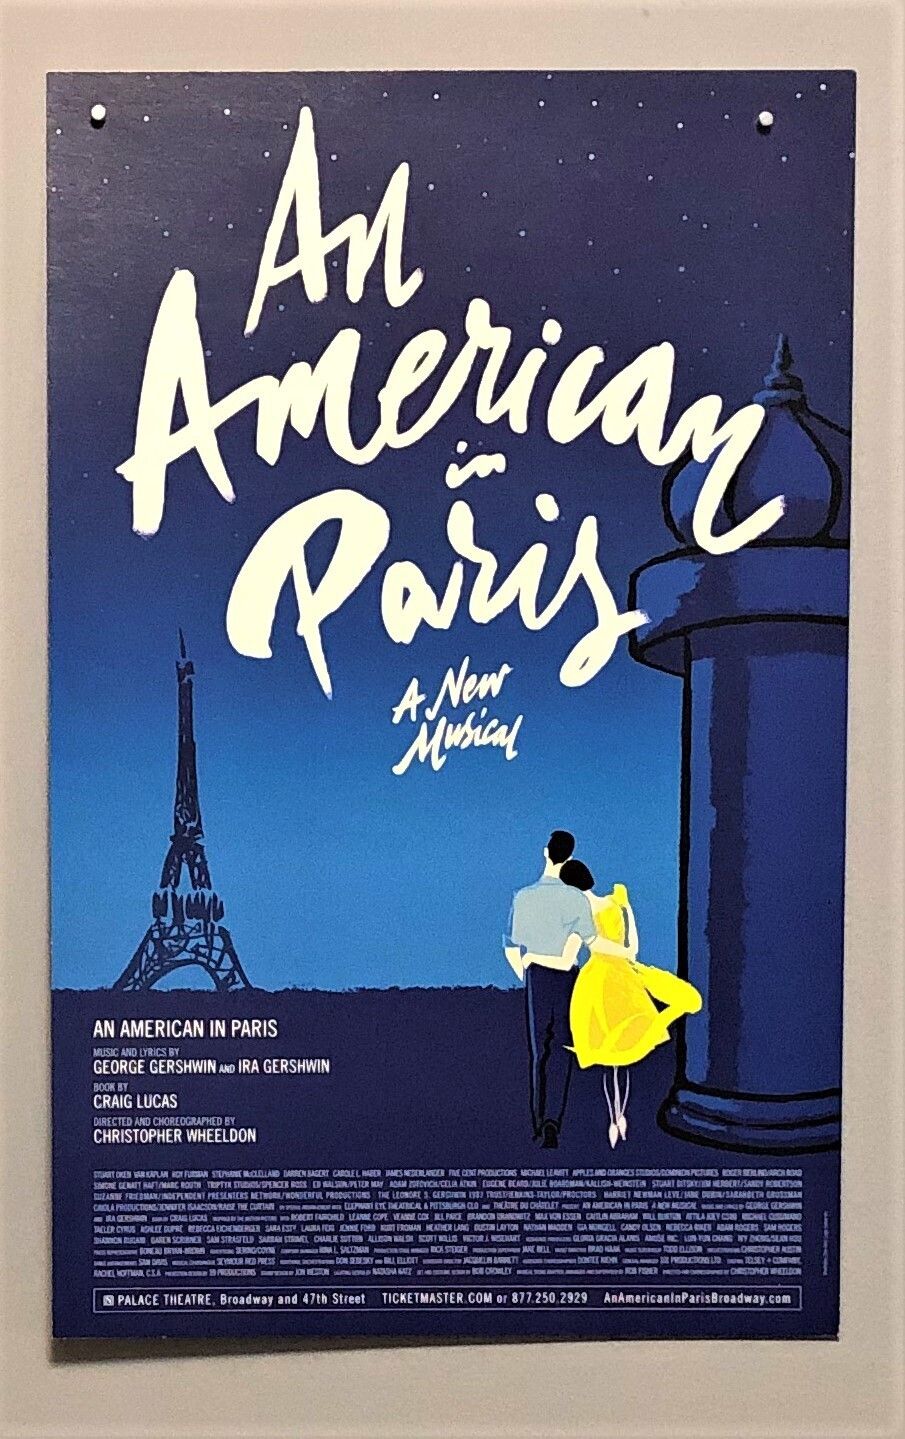 Theater an american in paris